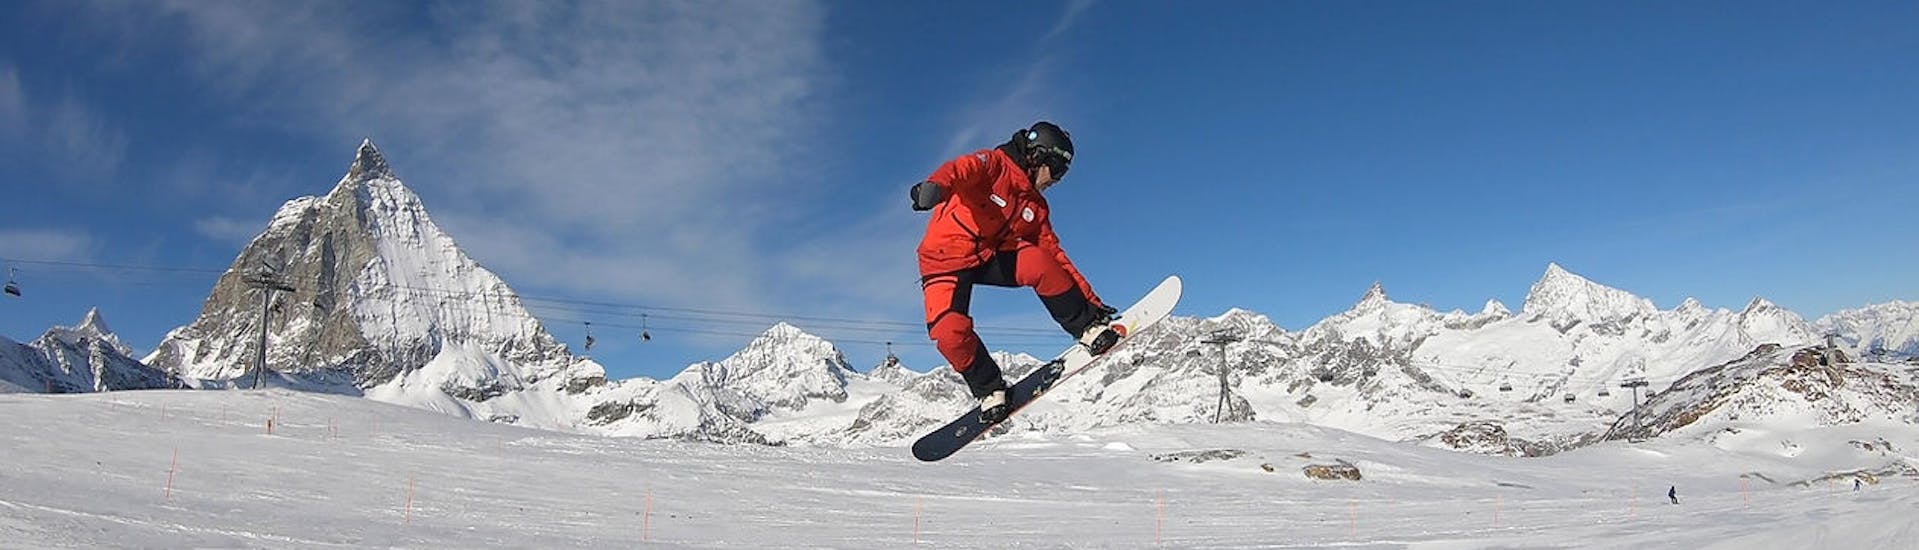 A snowboard instructor jumps over a ramp in front of the mountain panorama of Zermatt during Private Snowboarding Lessons for Kids & Adults of All Levels with the Evolution Ski School Zermatt.